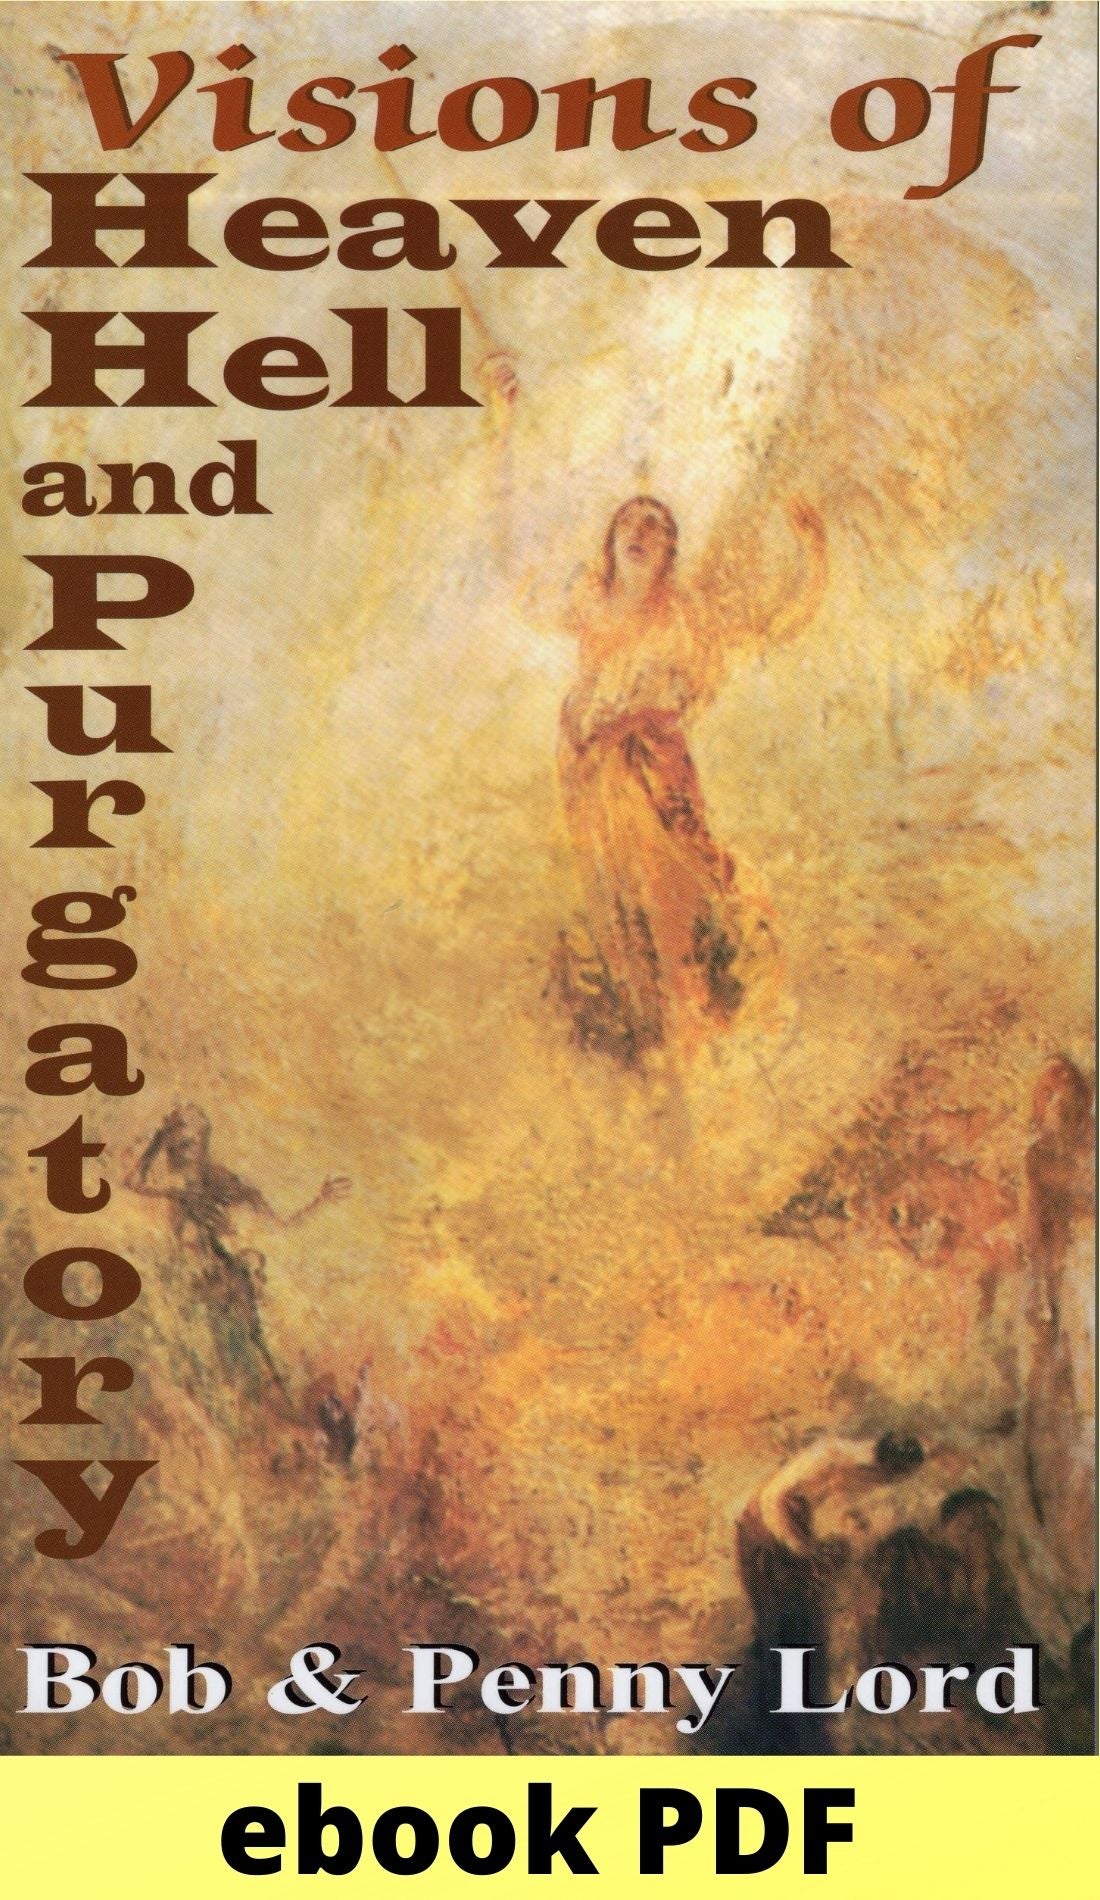 Visions of Heaven Hell and Purgatory ebook PDF - Bob and Penny Lord